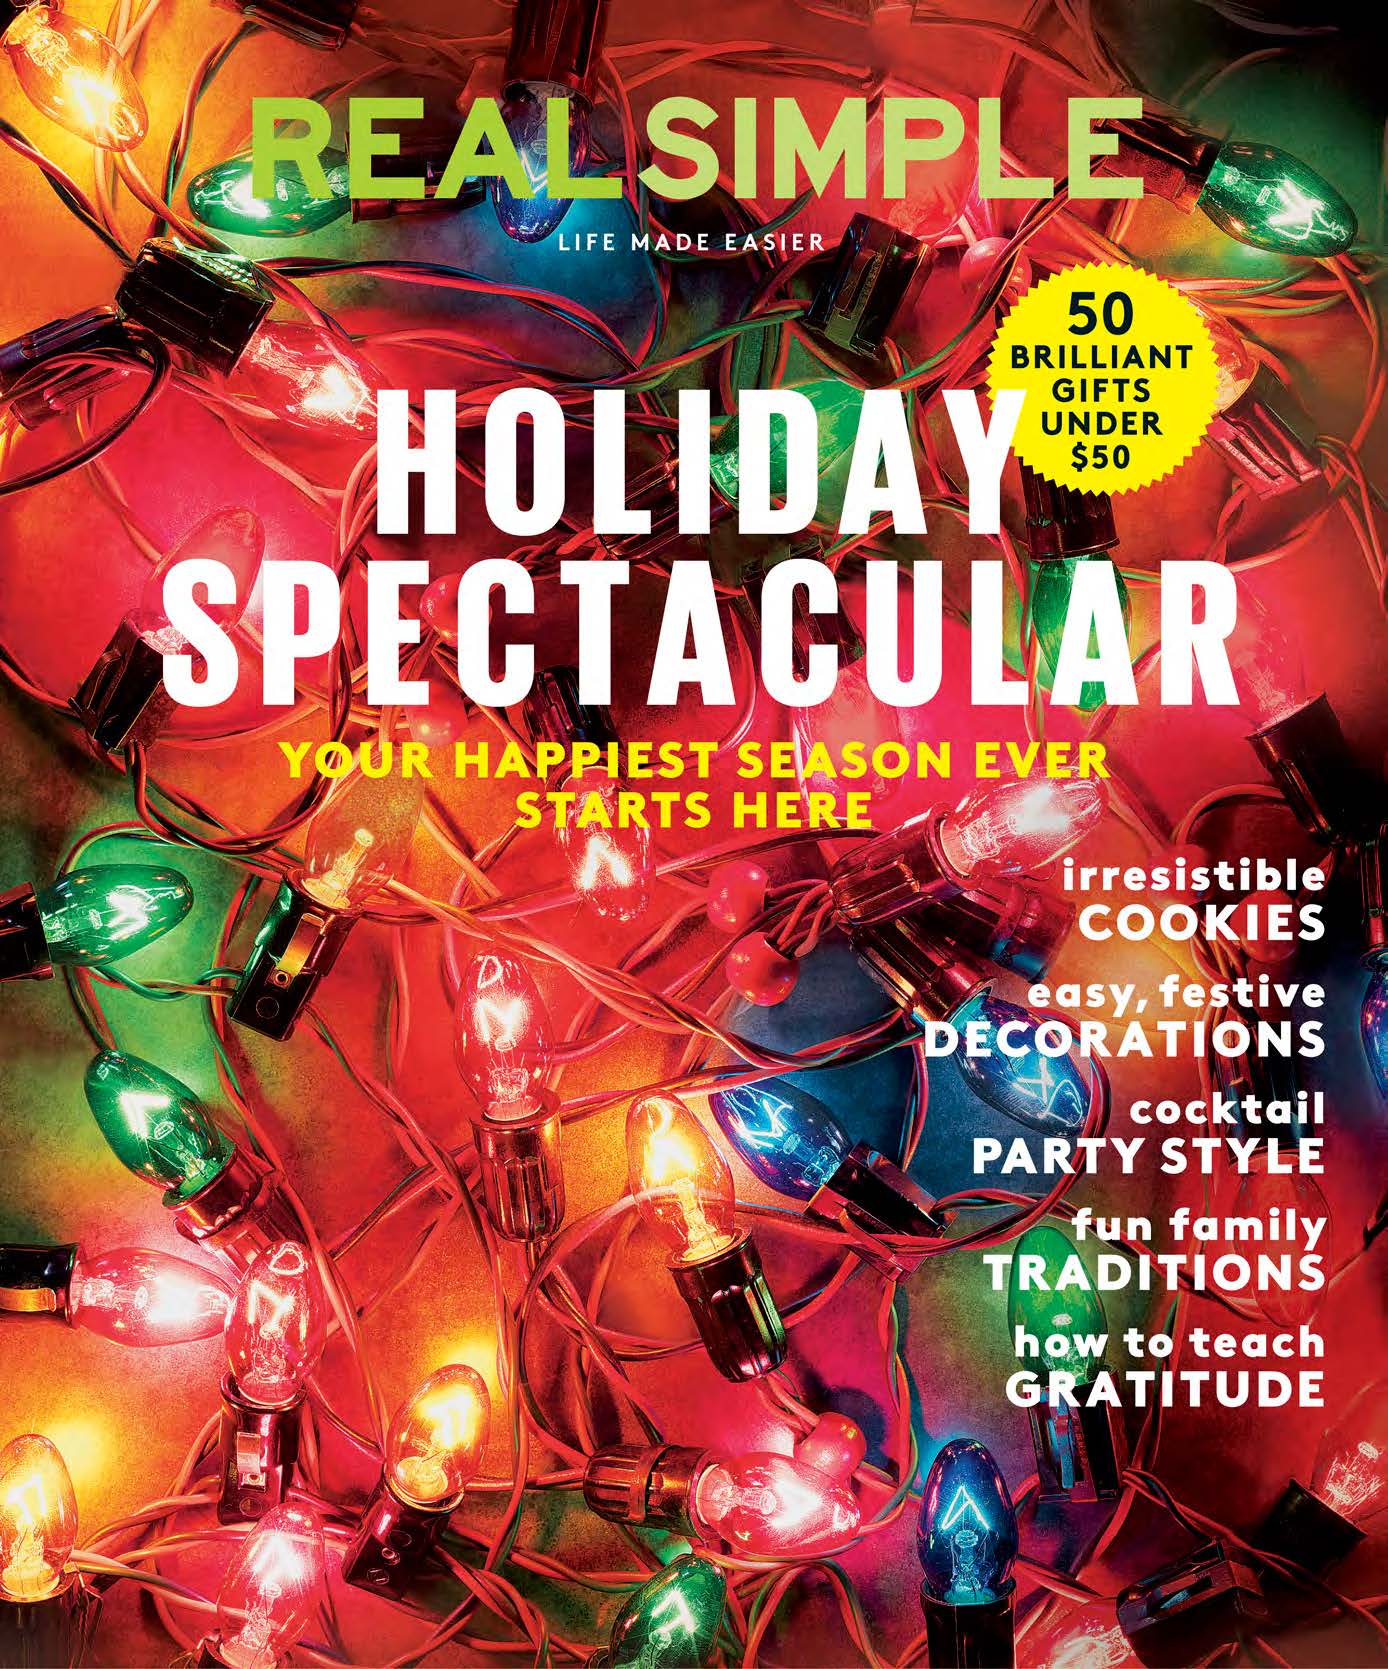 Real Simple-December 2014, "Holiday Spectacular"